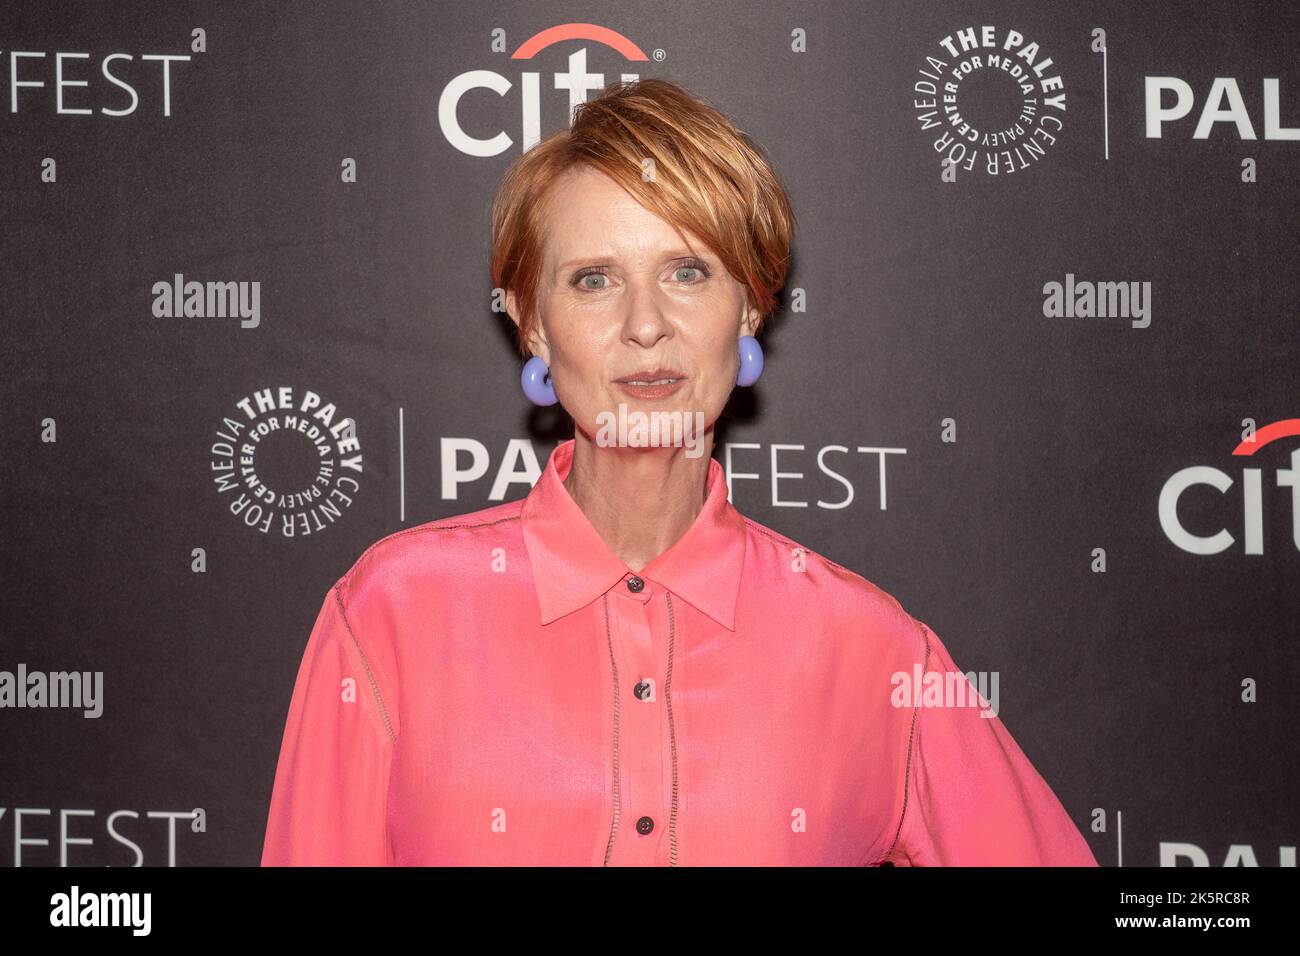 NEW YORK, NEW YORK - OCTOBER 09: Cynthia Nixon attends 'The Gilded Age' during 2022 PaleyFest NY at Paley Museum on October 09, 2022 in New York City. Credit: Ron Adar/Alamy Live News Stock Photo